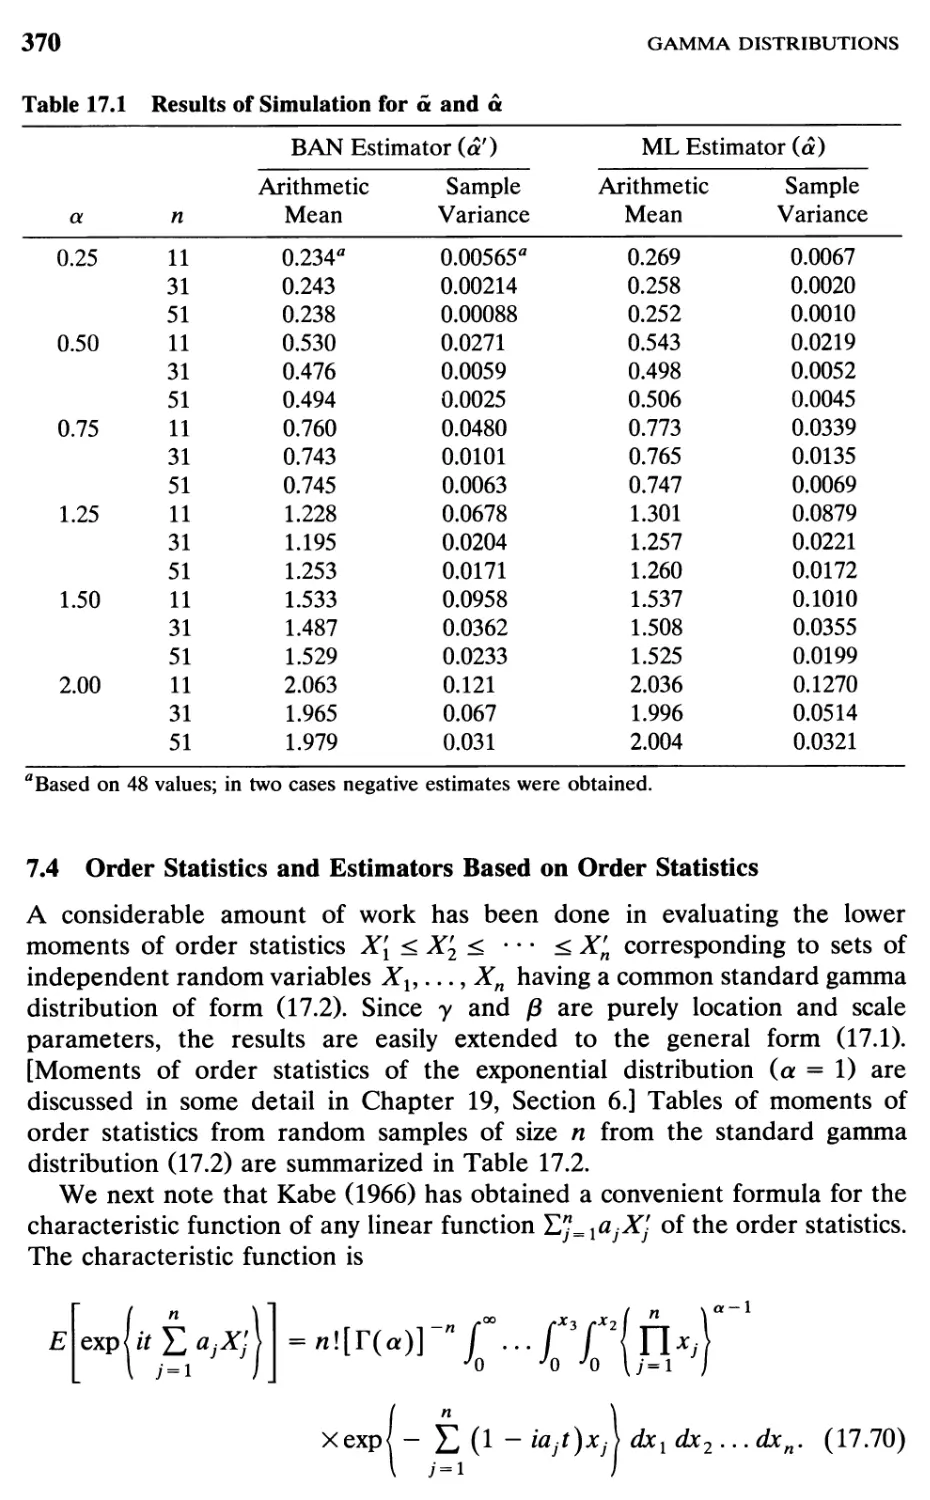 TABLE 17.1 Results of simulation of a and a 370
7.4 Order Statistics and Estimators Based on Order Statistics, 370